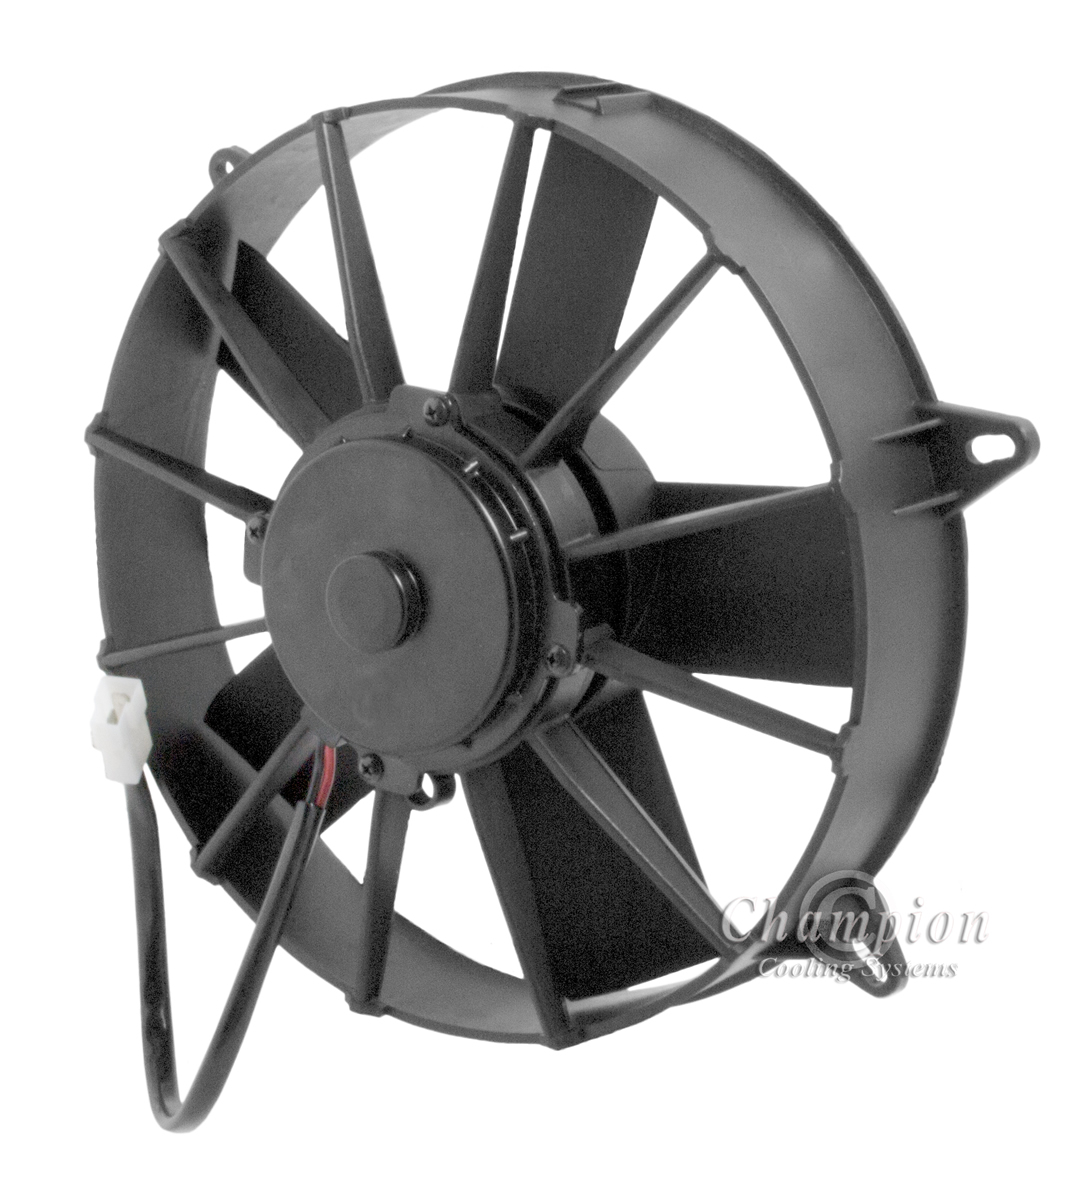 https://www.championcooling.com/photos/Photos%20White/With%20Fans/paddle_fans/paddle_wm_angle_white.jpg